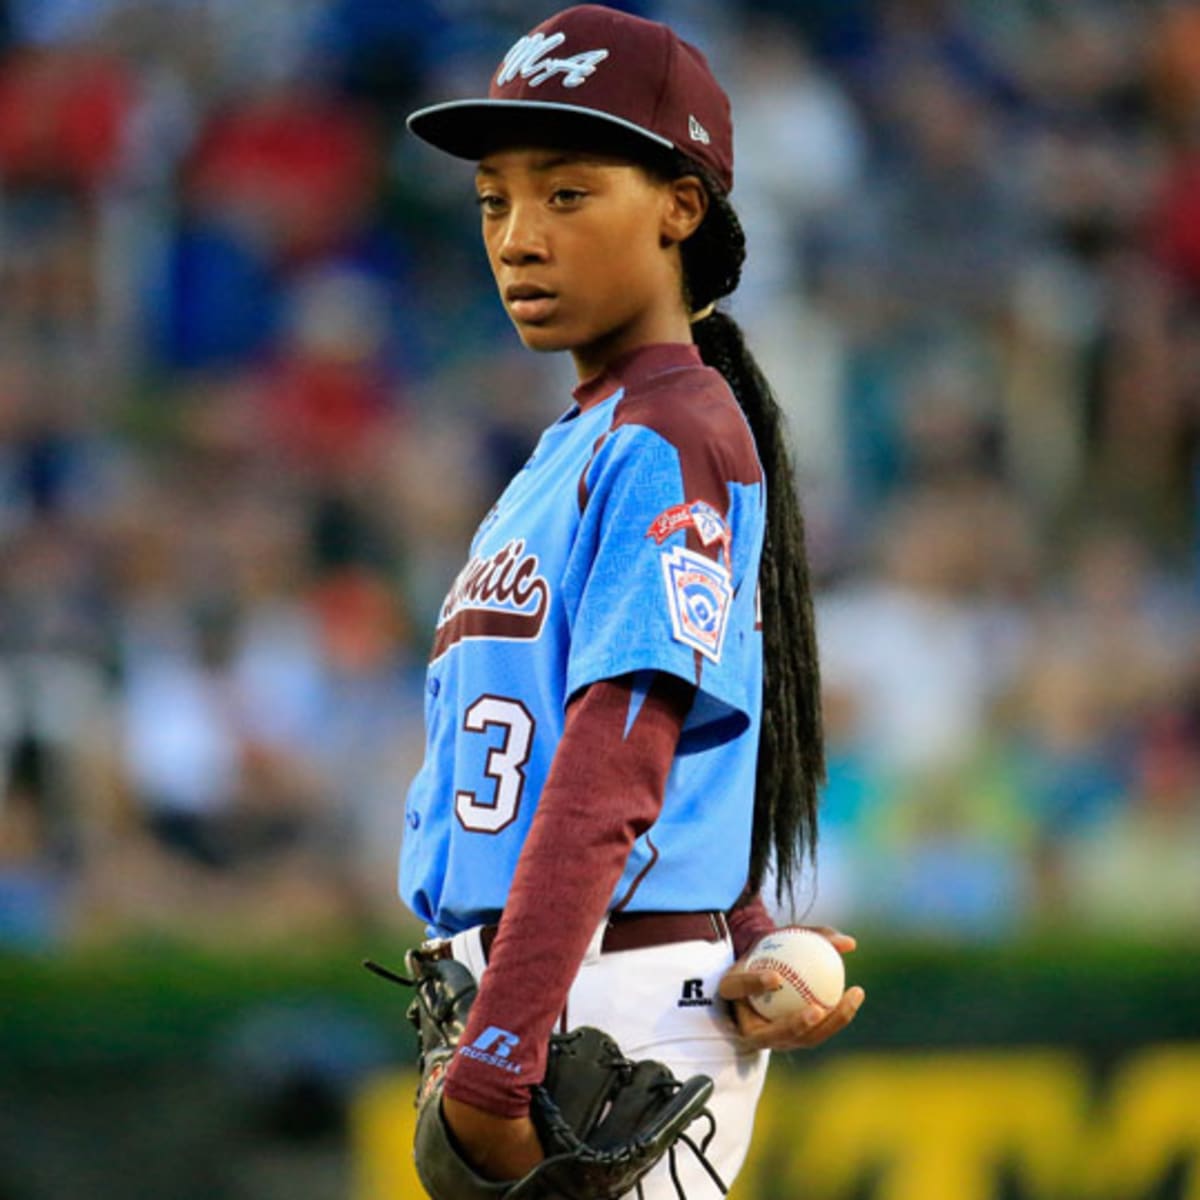 Davis to donate jersey from Little League Series shutout to Baseball Hall of Fame - Sports Illustrated